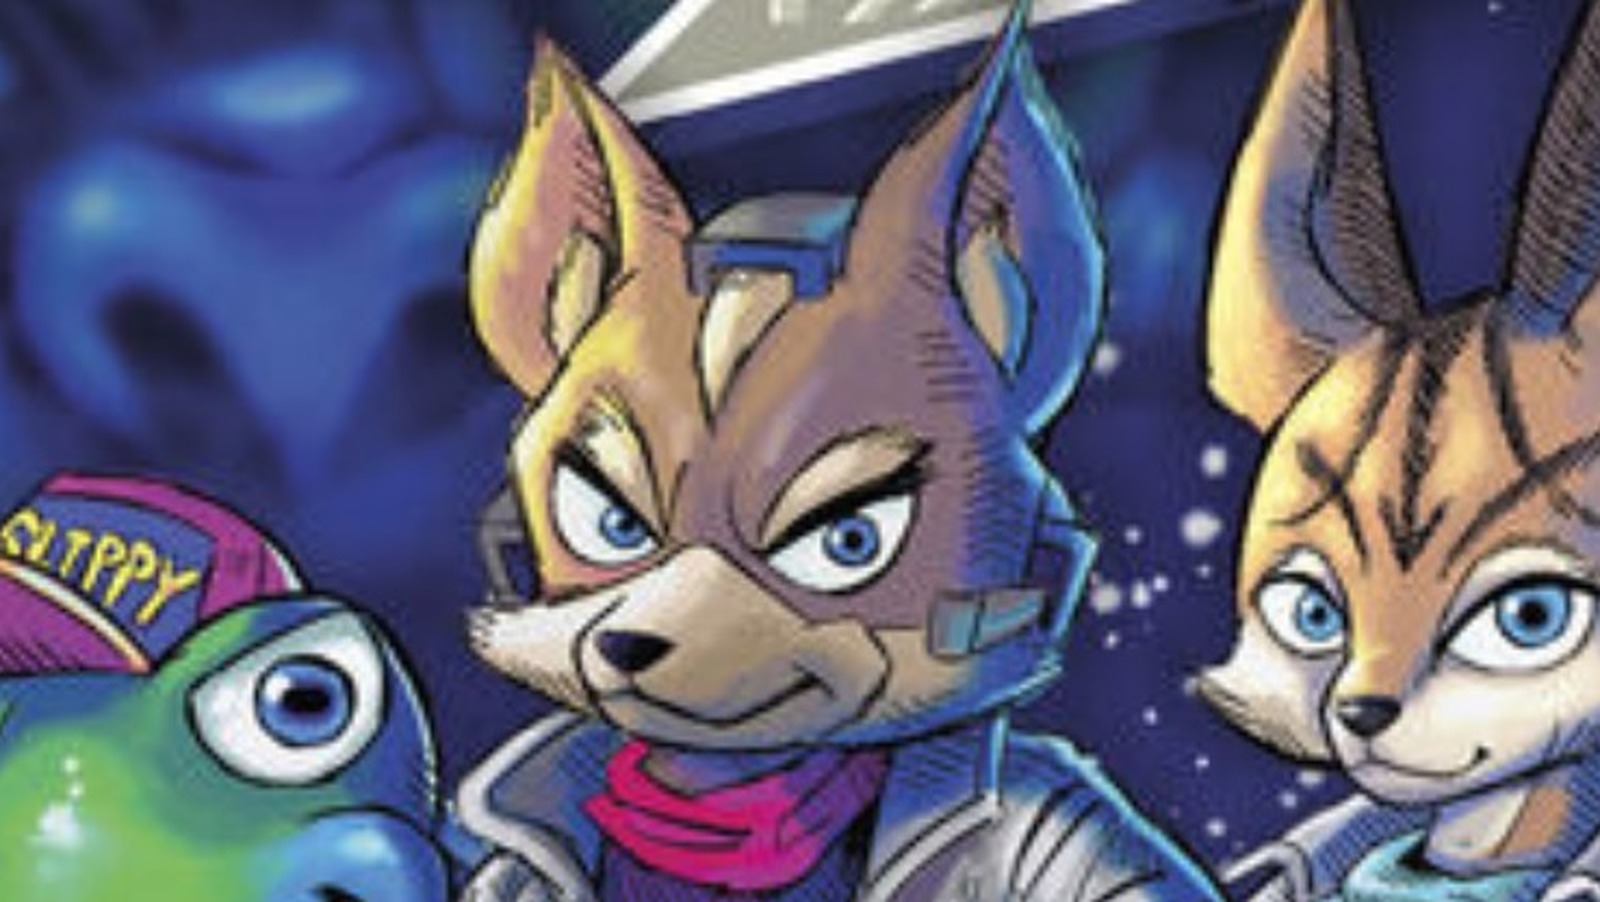 Star Fox 2 is strange, daring, and an important piece of game